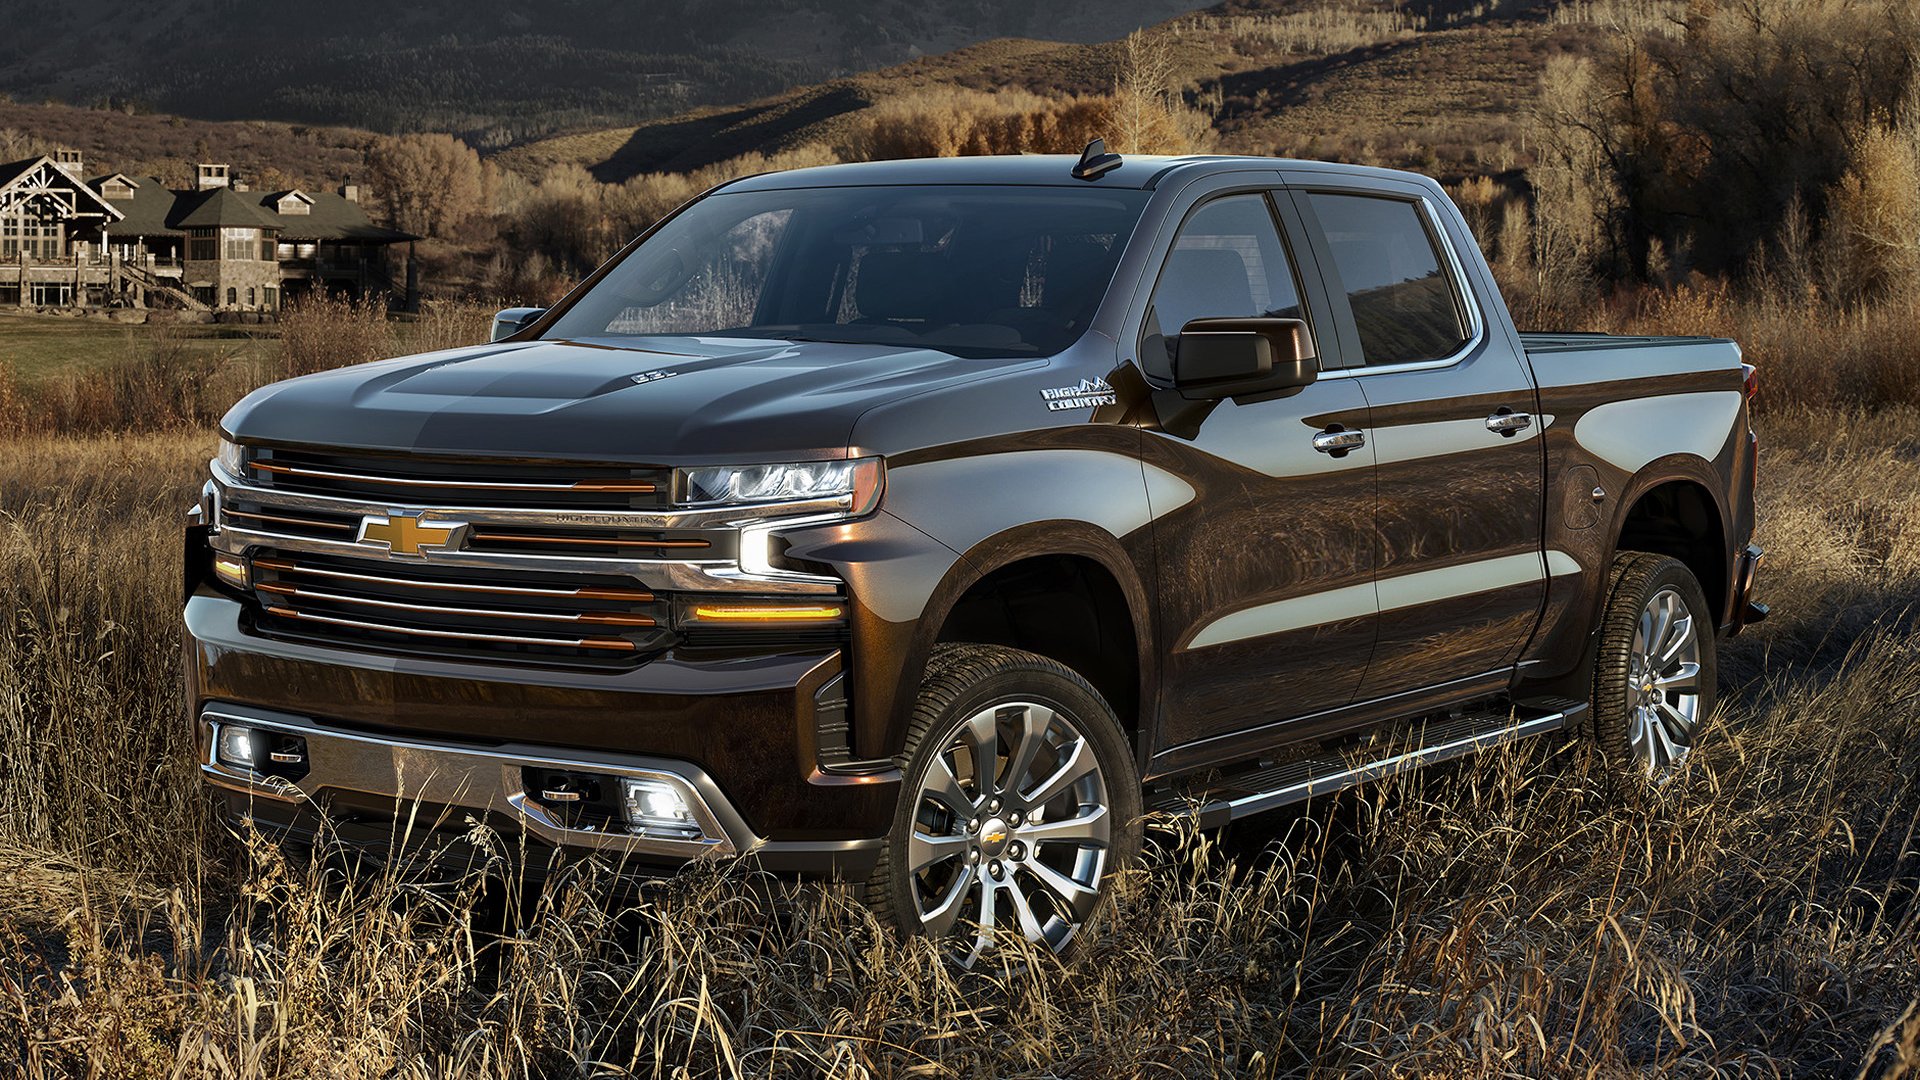 Chevrolet Silverado High Country Crew Cab HD Wallpaper and Background Image